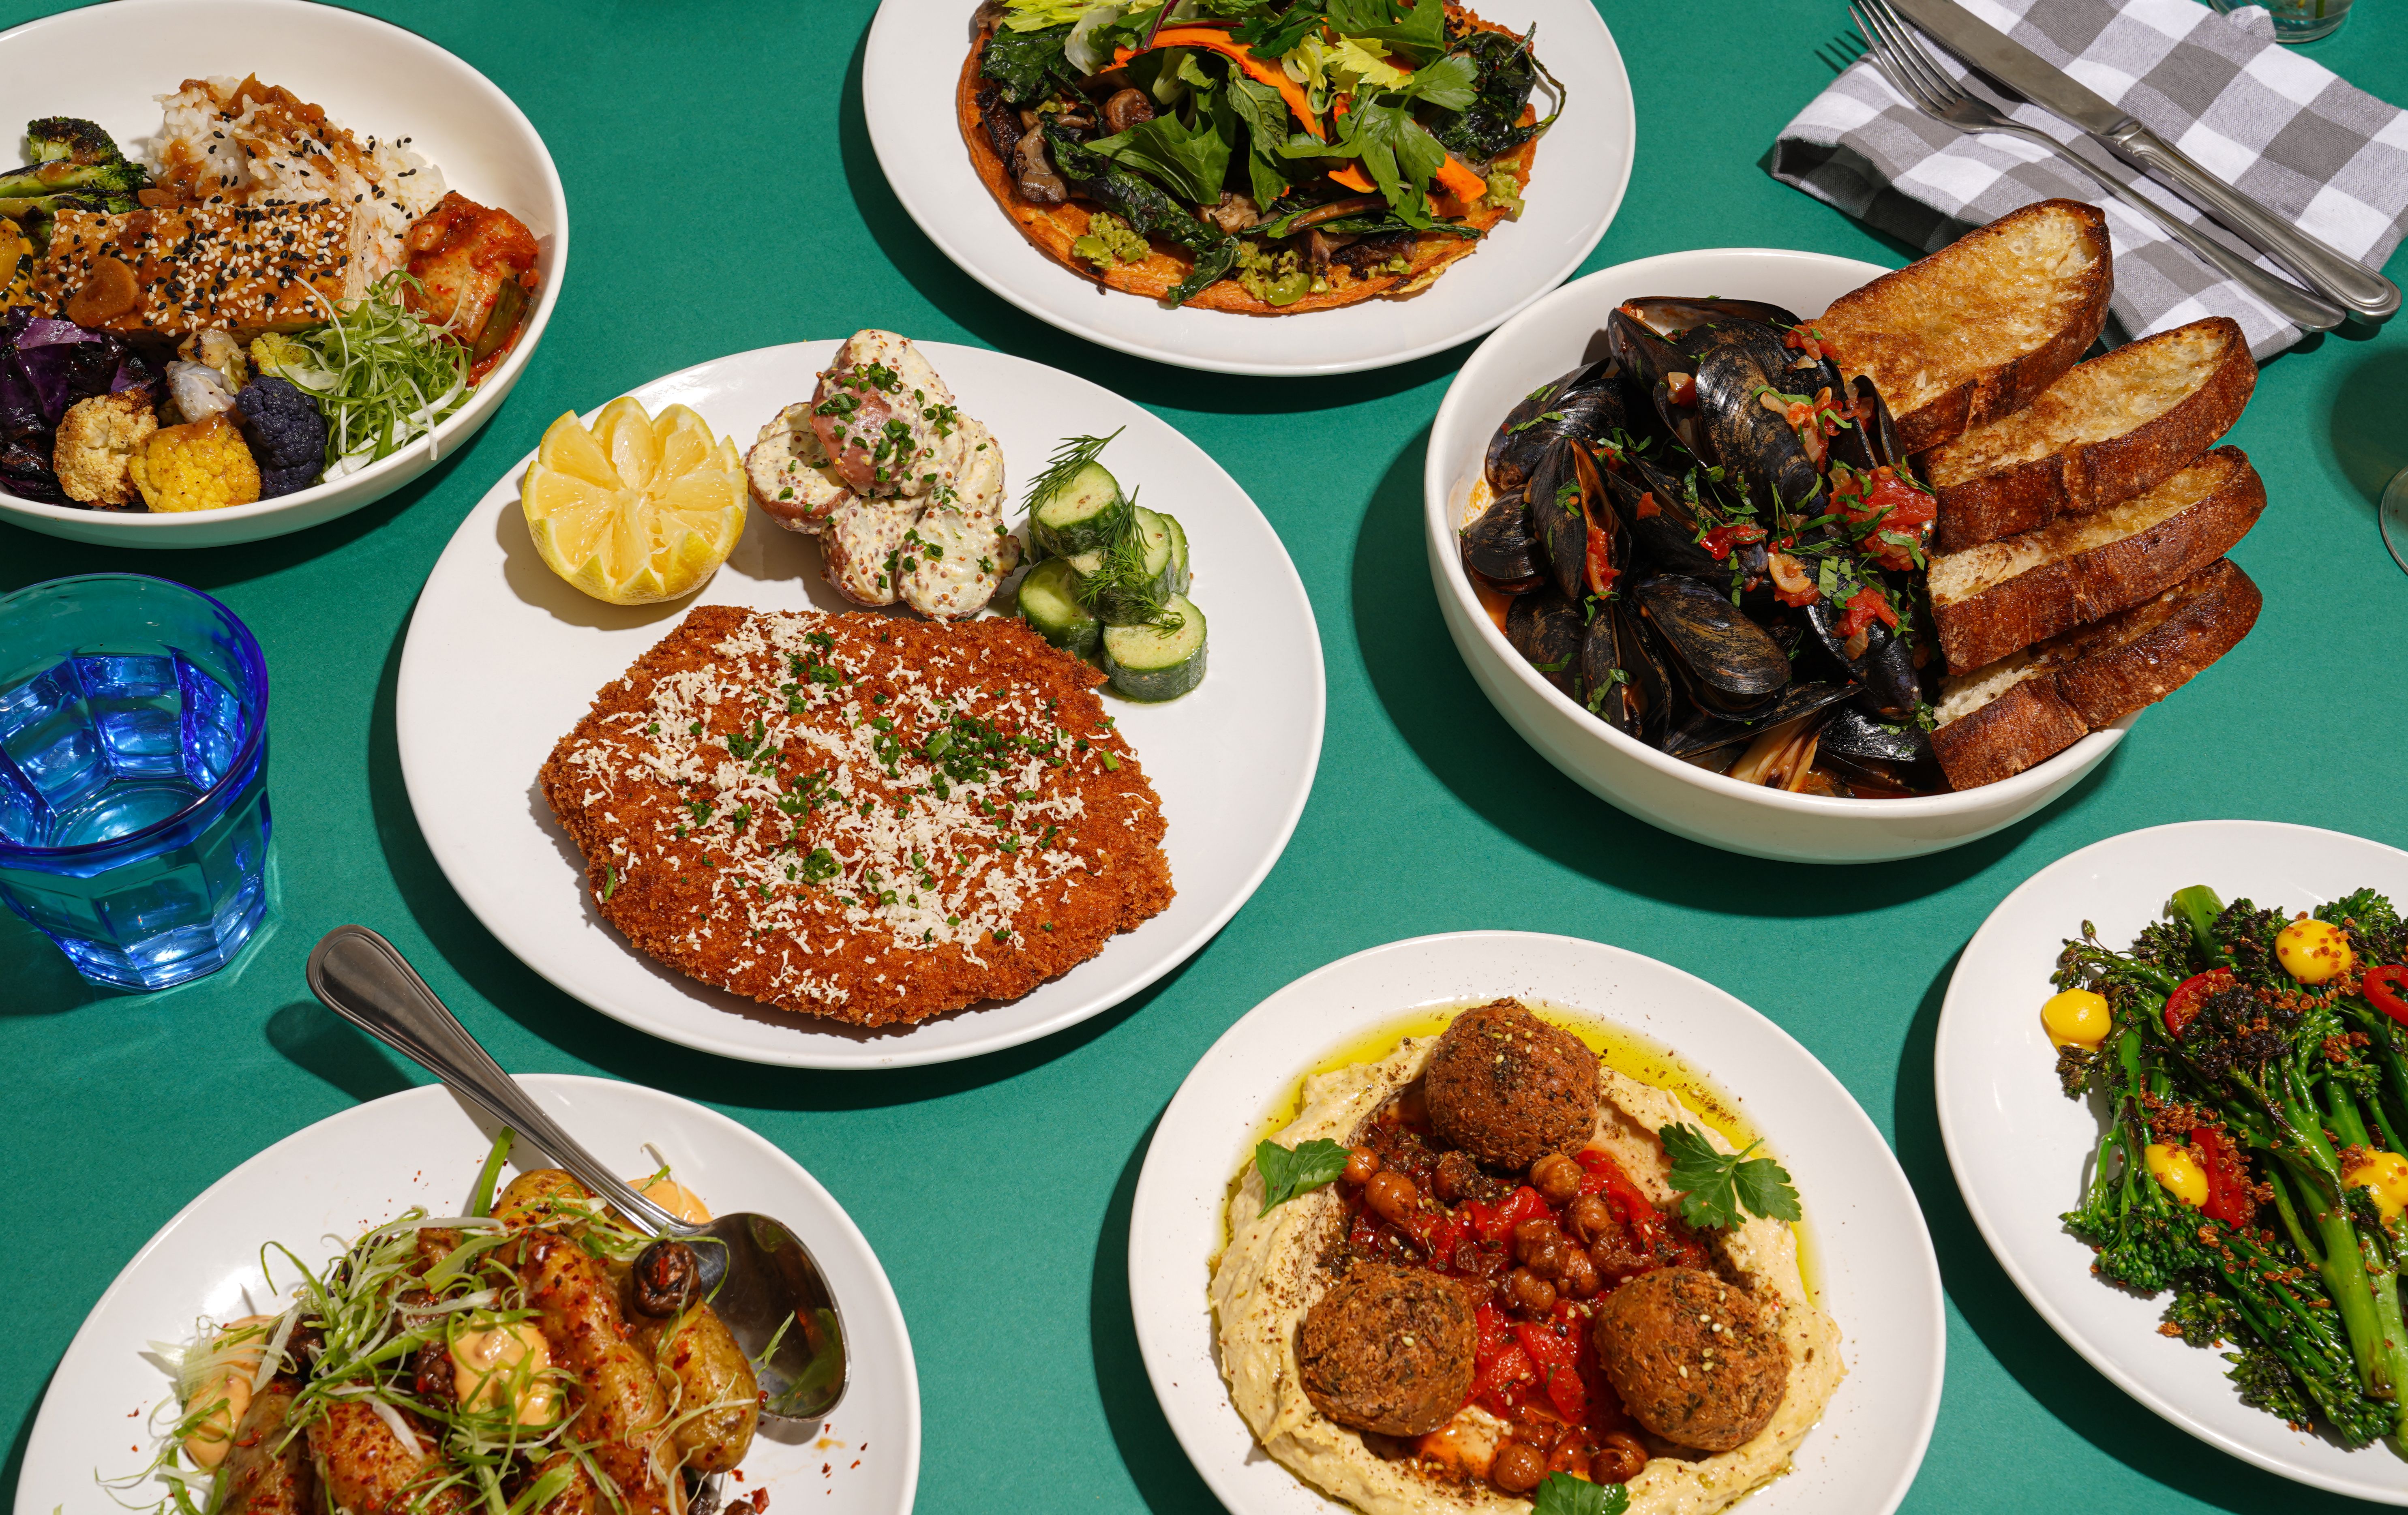 Mussels, Falafel and other dish on a green table.